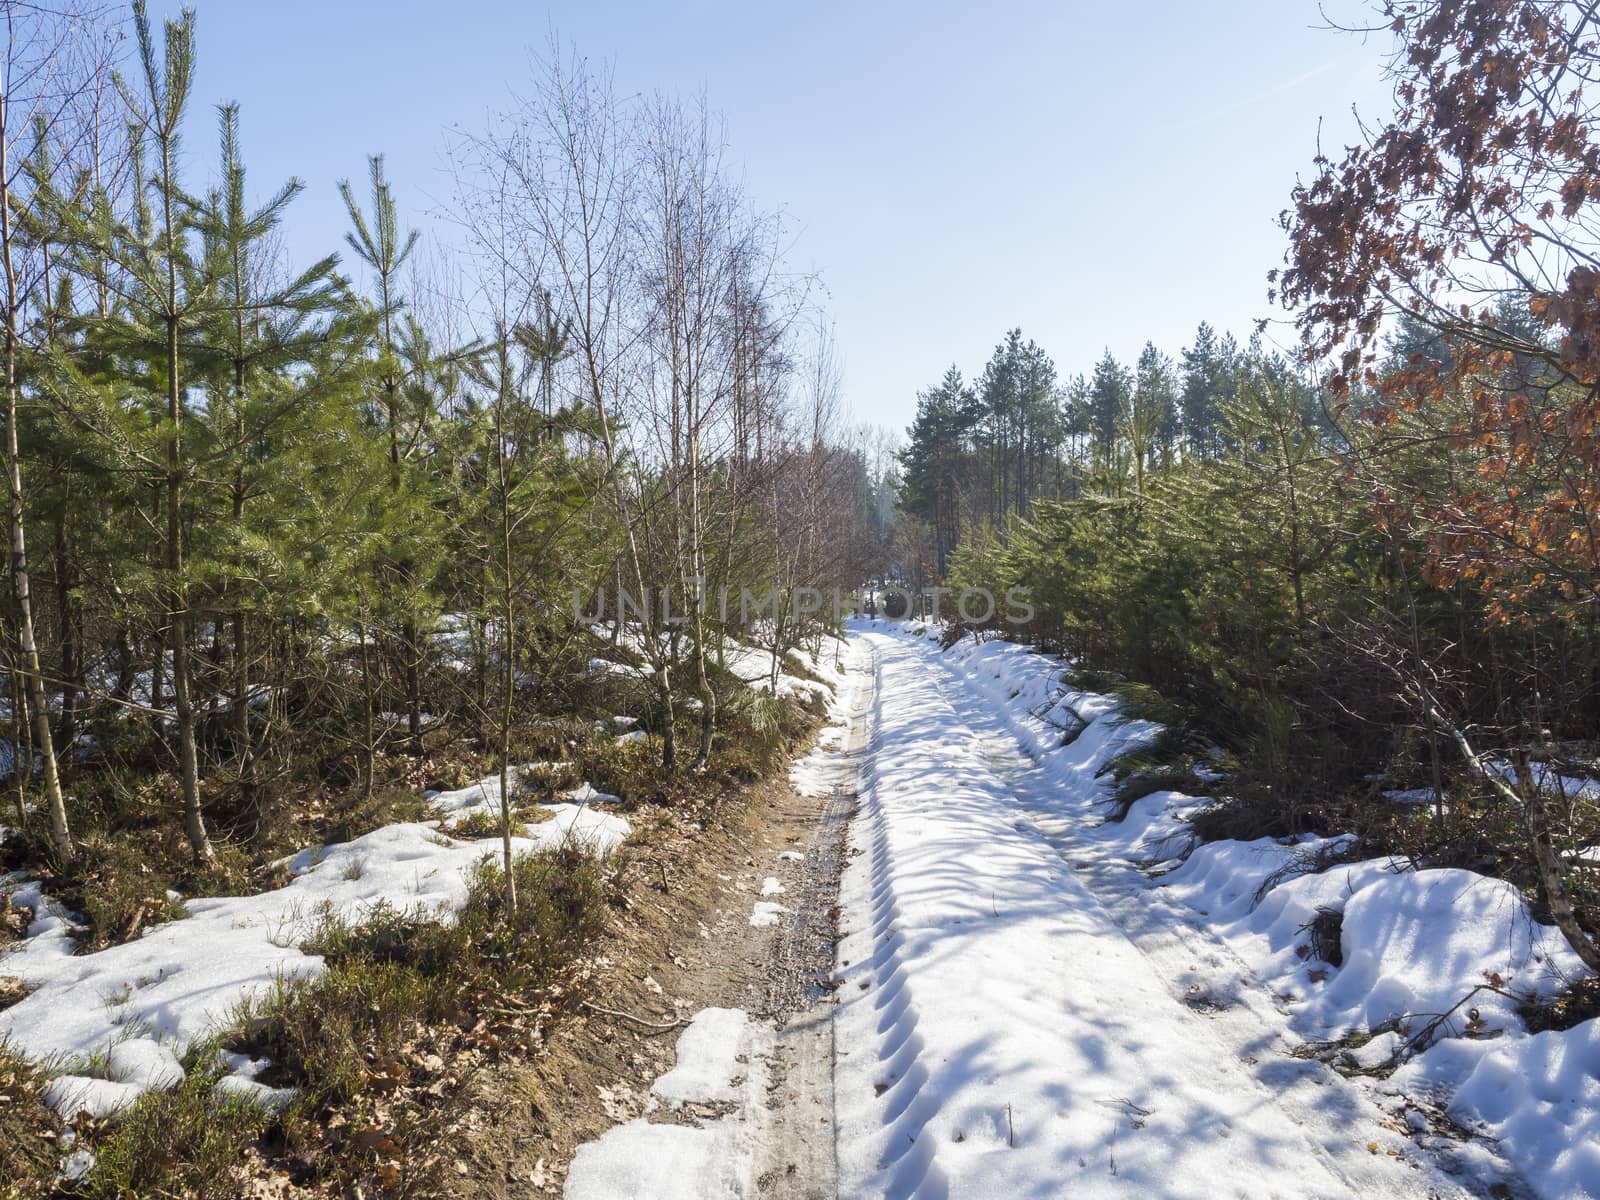 snow covered field dirt path in winter forest with spruce and pine trees, landscape at sunny day, blue sky.